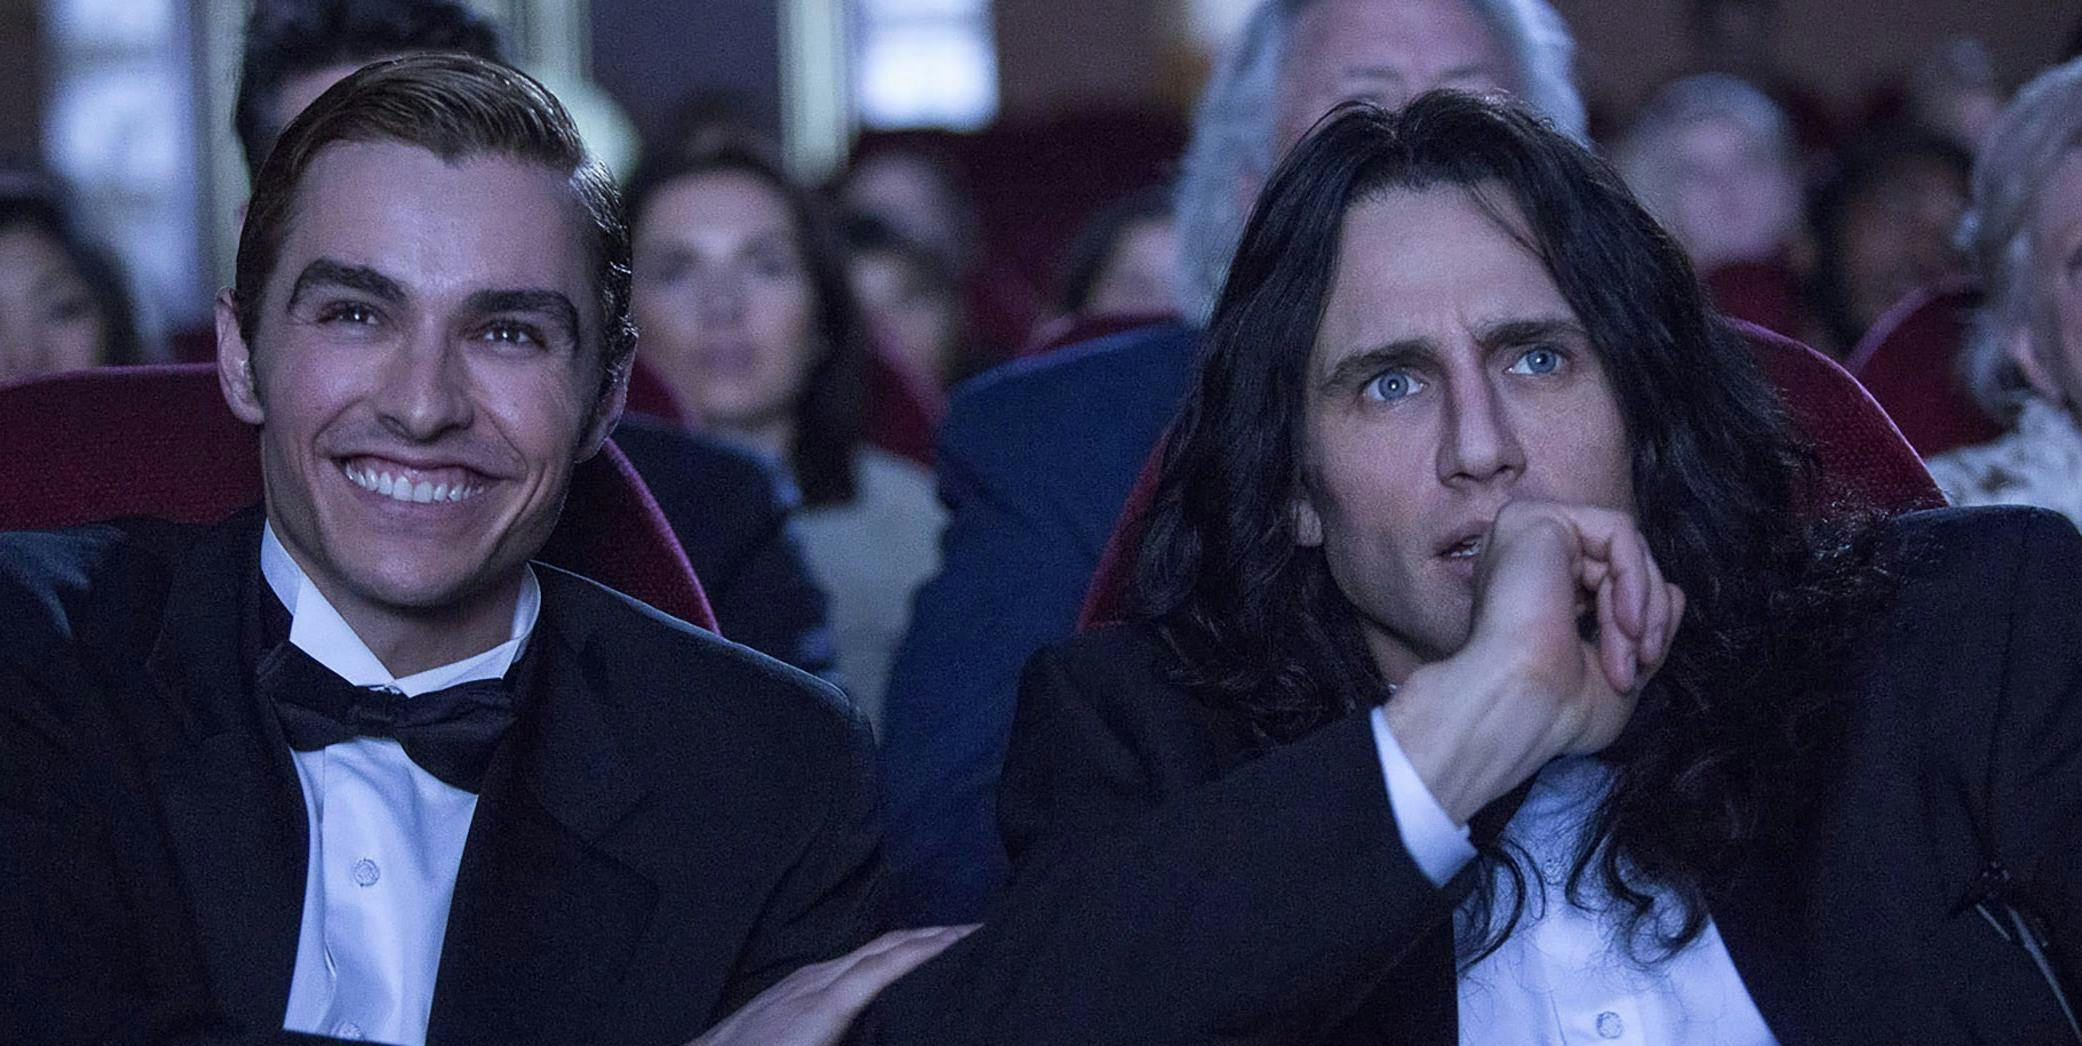 A still image featuring Dave Franco and James Franco from the SXSW film 